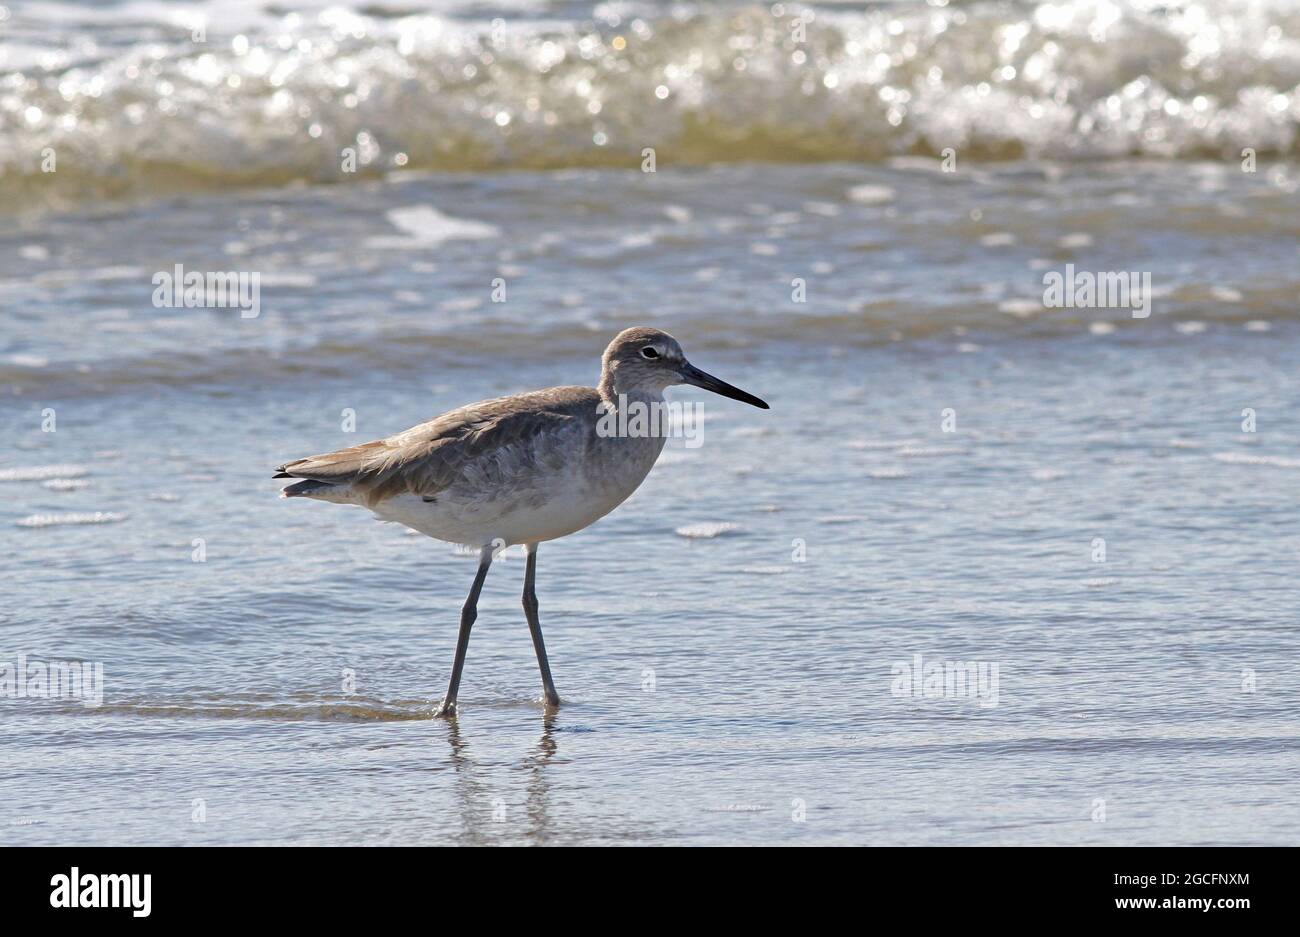 A shorebird called a willet wading in ocean surf. Stock Photo